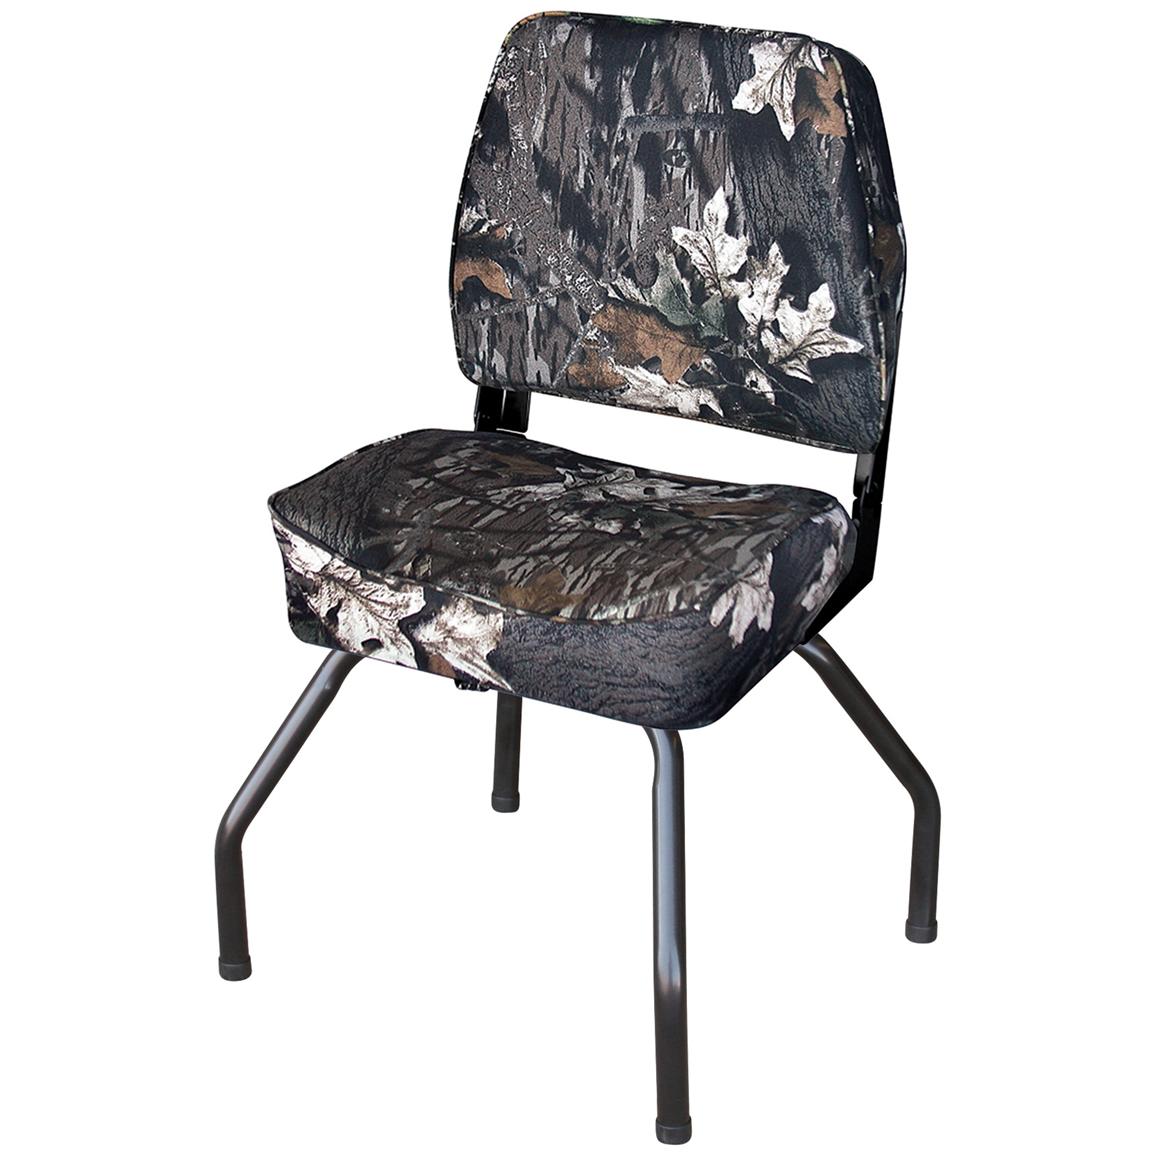 wise® combo duck boat / hunting blind seat - 204003